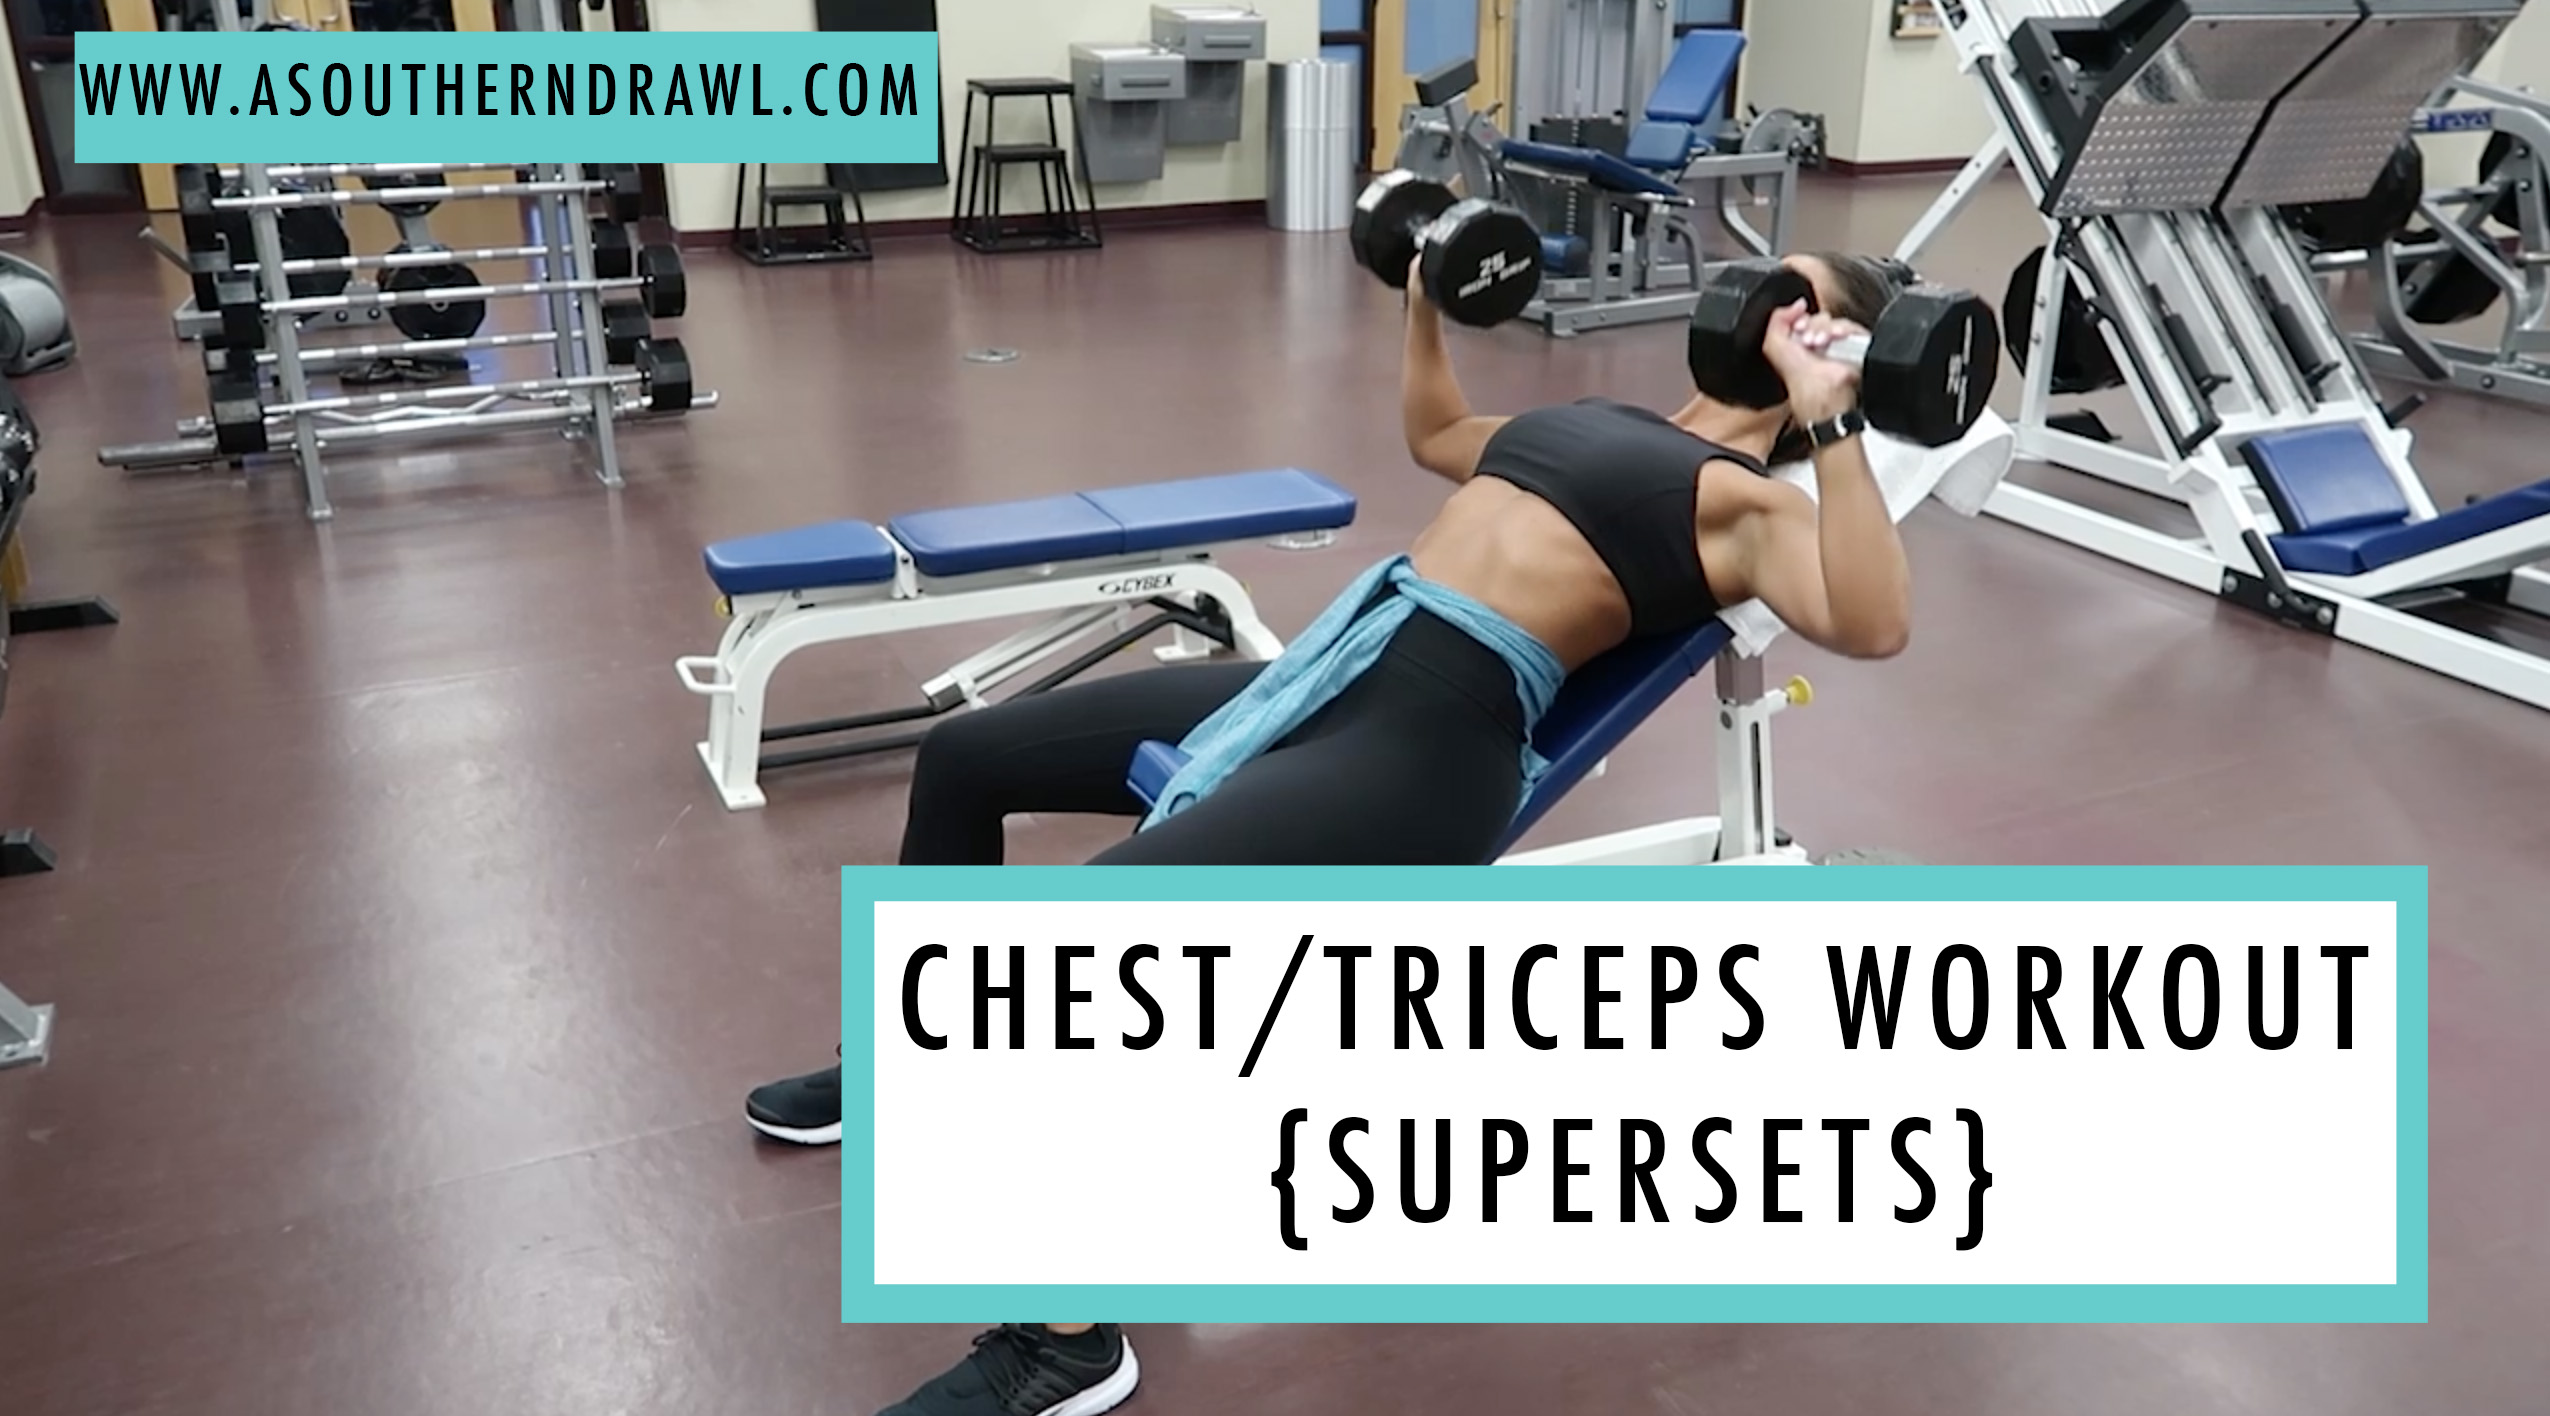 chest and triceps workout, chest exercises, tricep exercises, a southern drawl videos, FitWithASD videos, #FitWithASD videos, lululemon racerback tank, a southern drawl fitness videos, grace wainwright fitness, lululemon align pant, lululemon align crop leggings, lululemon free to be wild bra, lululemon sports bra, a southern drawl workouts, winter activewear, fall activewear, lululemon high times pant, lululemon wunder under pant, lululemon activewear, athleisure, cute activewear outfit, a southern drawl workouts, weekly workout routine, weekly workouts, weekly exercises, polar a360 watch, cute activewear, cute workout outfit, running routine, girl gains, fitness inspiration, fitspo, athleisure, nike athleisure outfit // grace wainwright a southern drawl